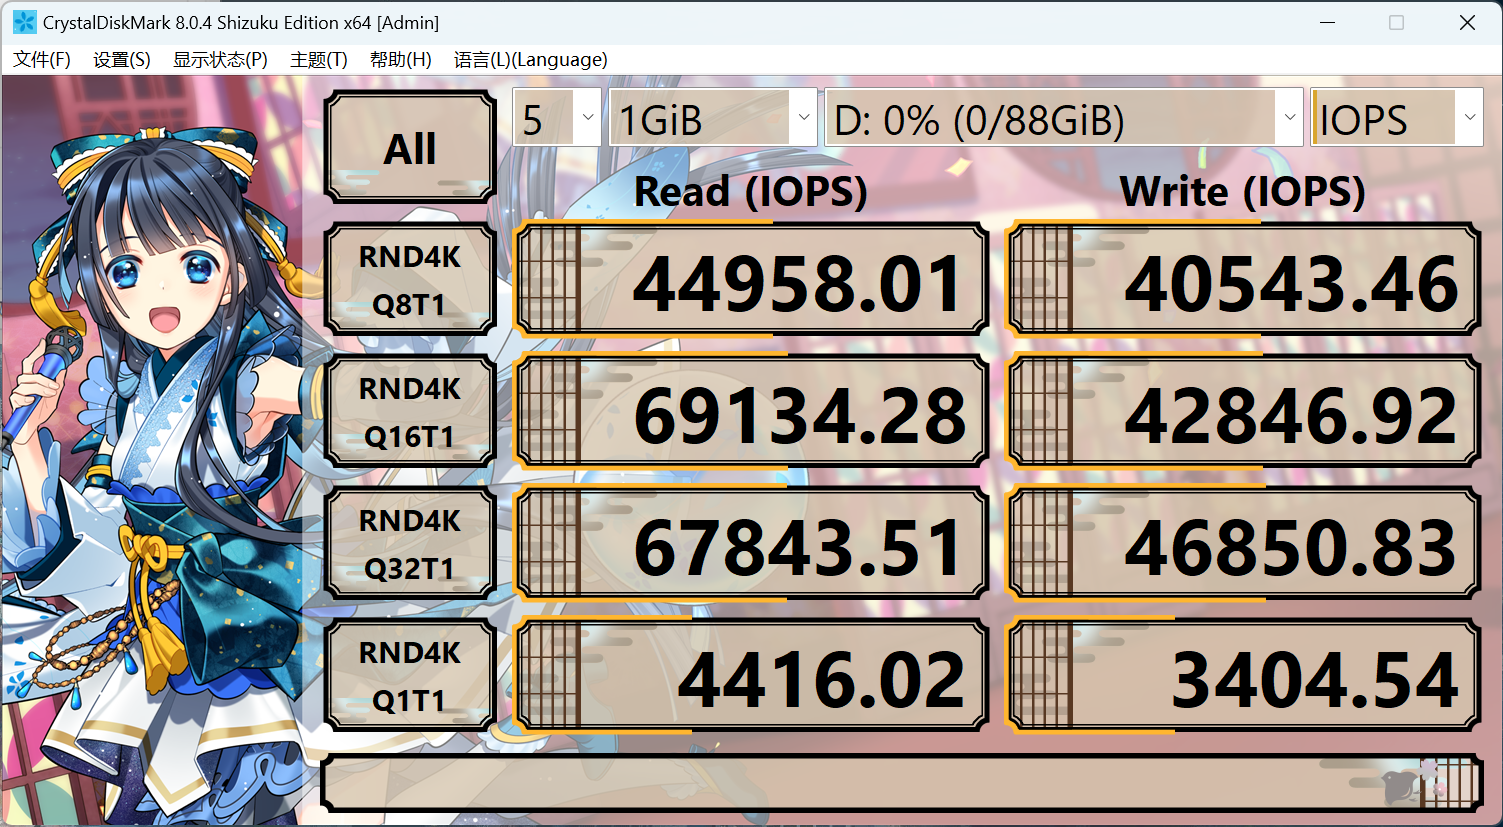 R5IOPS.png